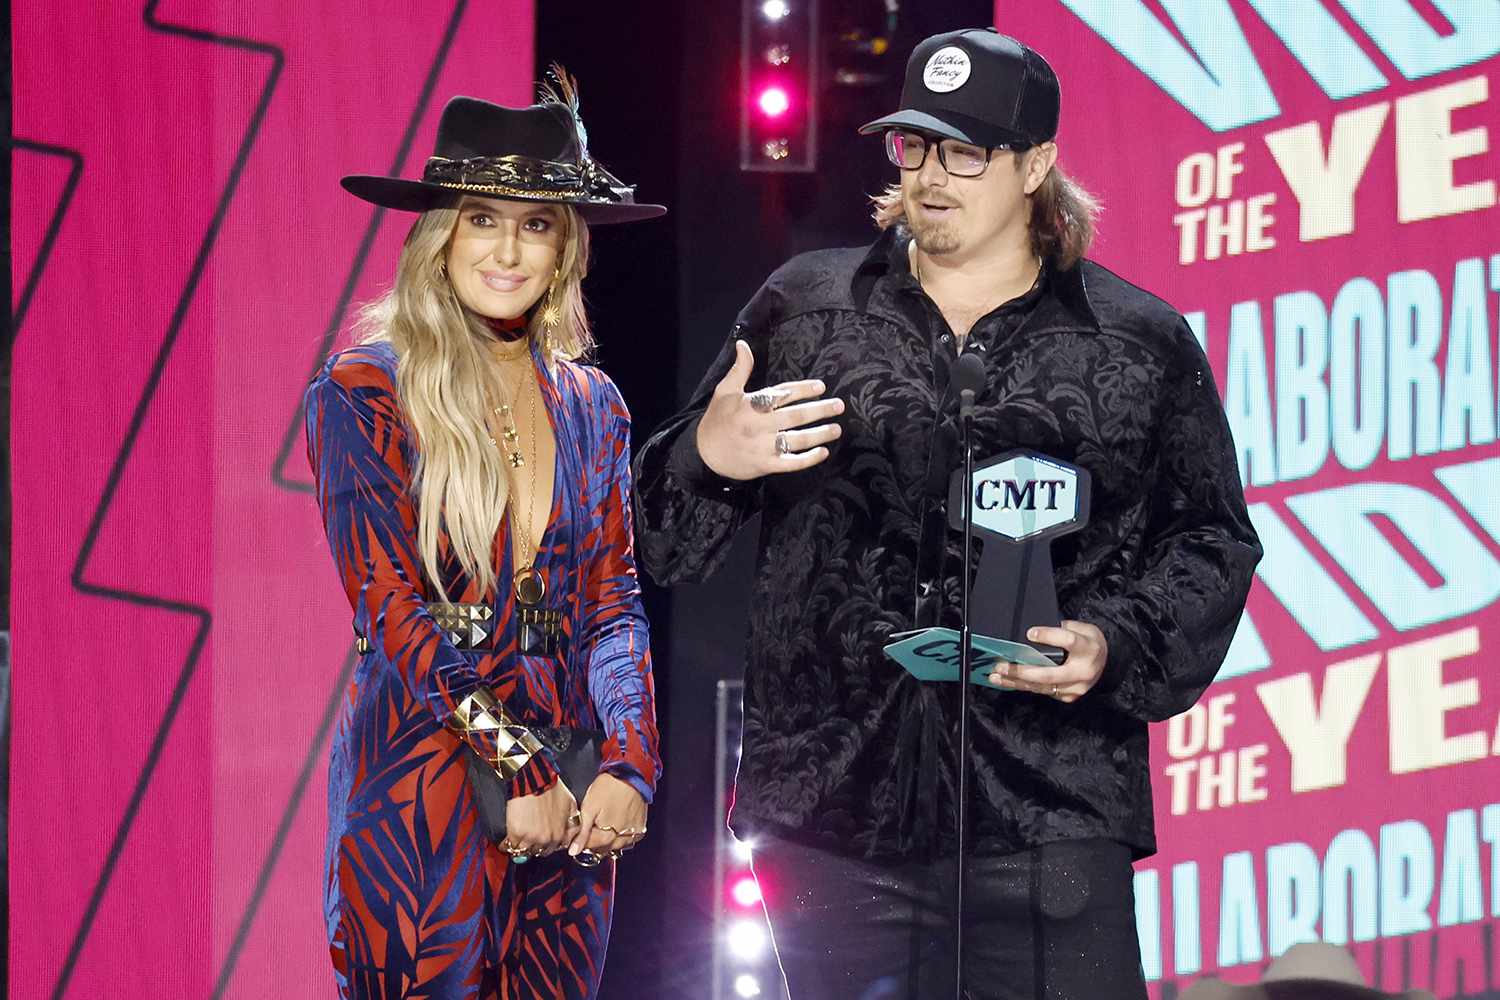 AUSTIN, TEXAS - APRIL 02: Lainey Wilson and HARDY speak onstage during the 2023 CMT Music Awards at Moody Center on April 02, 2023 in Austin, Texas. (Photo by Jason Kempin/Getty Images)